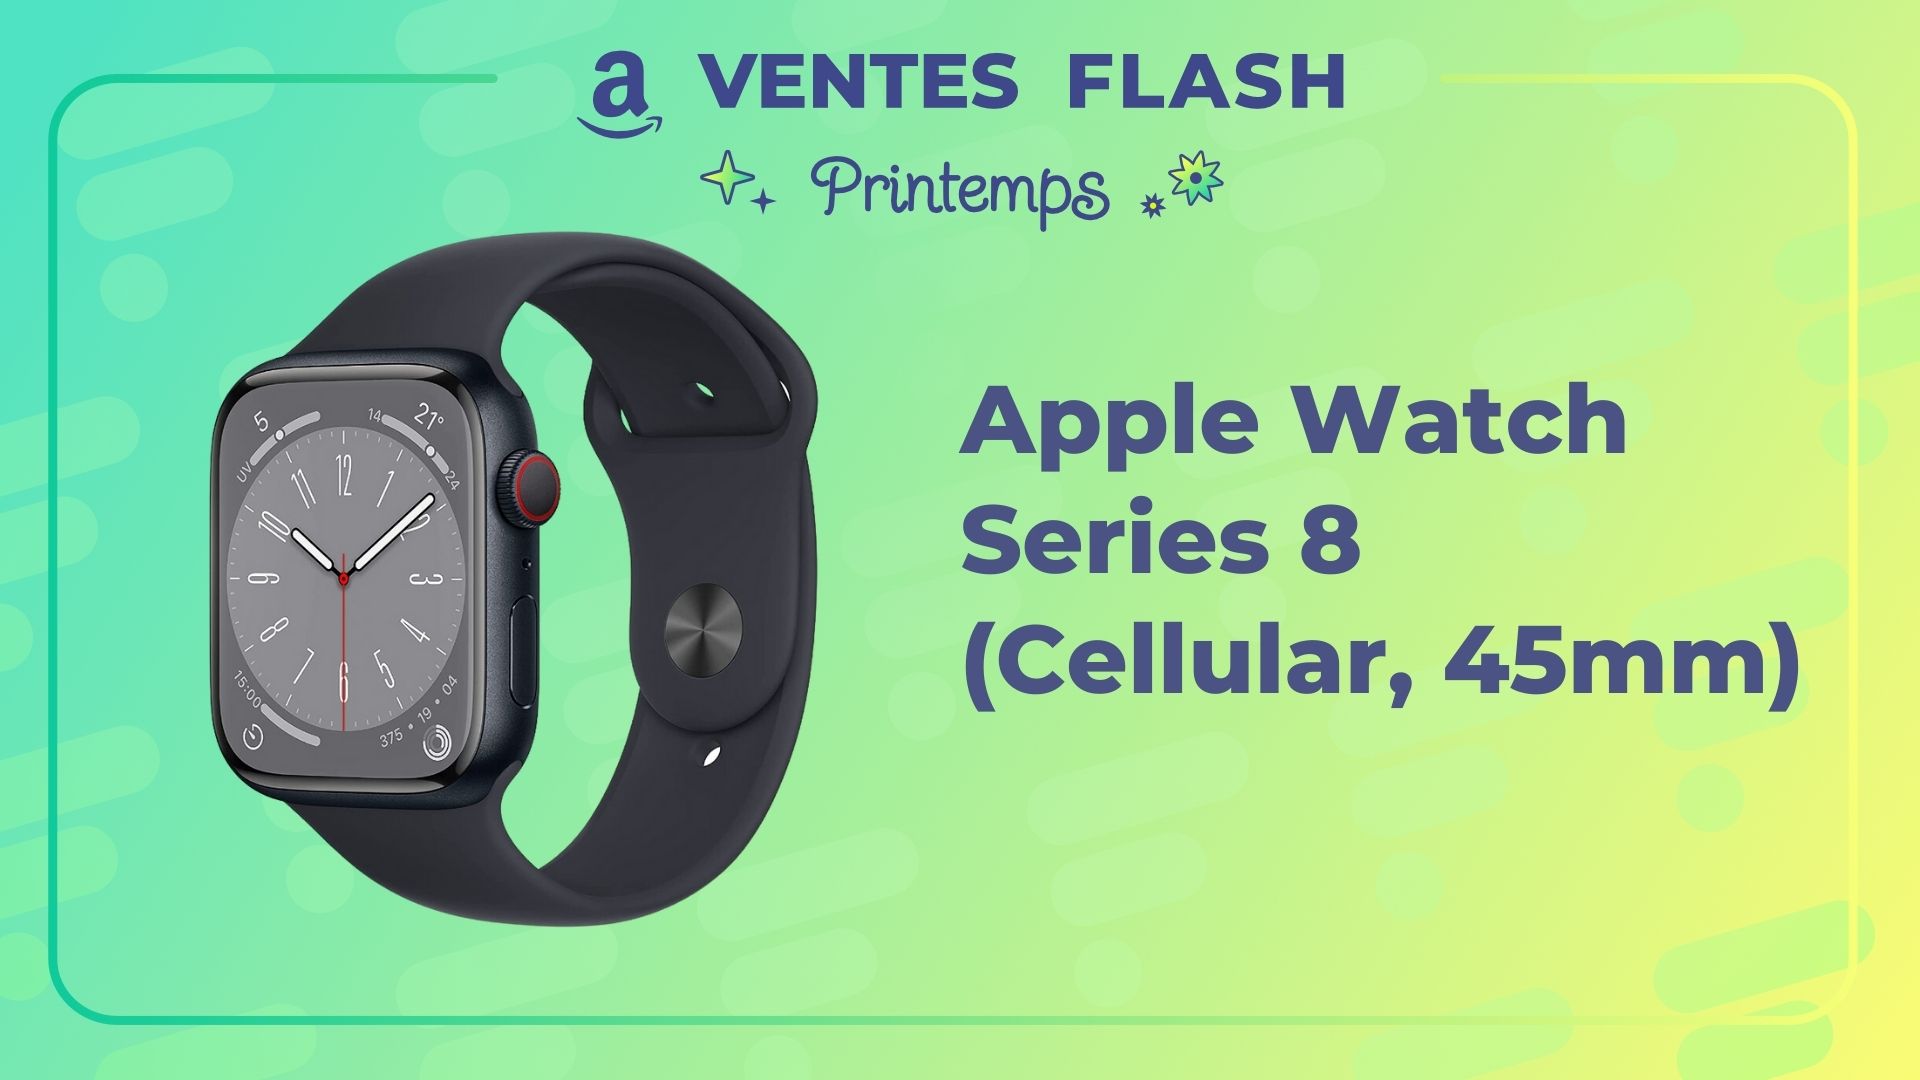 The Apple Watch Series 8 compatible 4G loses 100 € of its price during